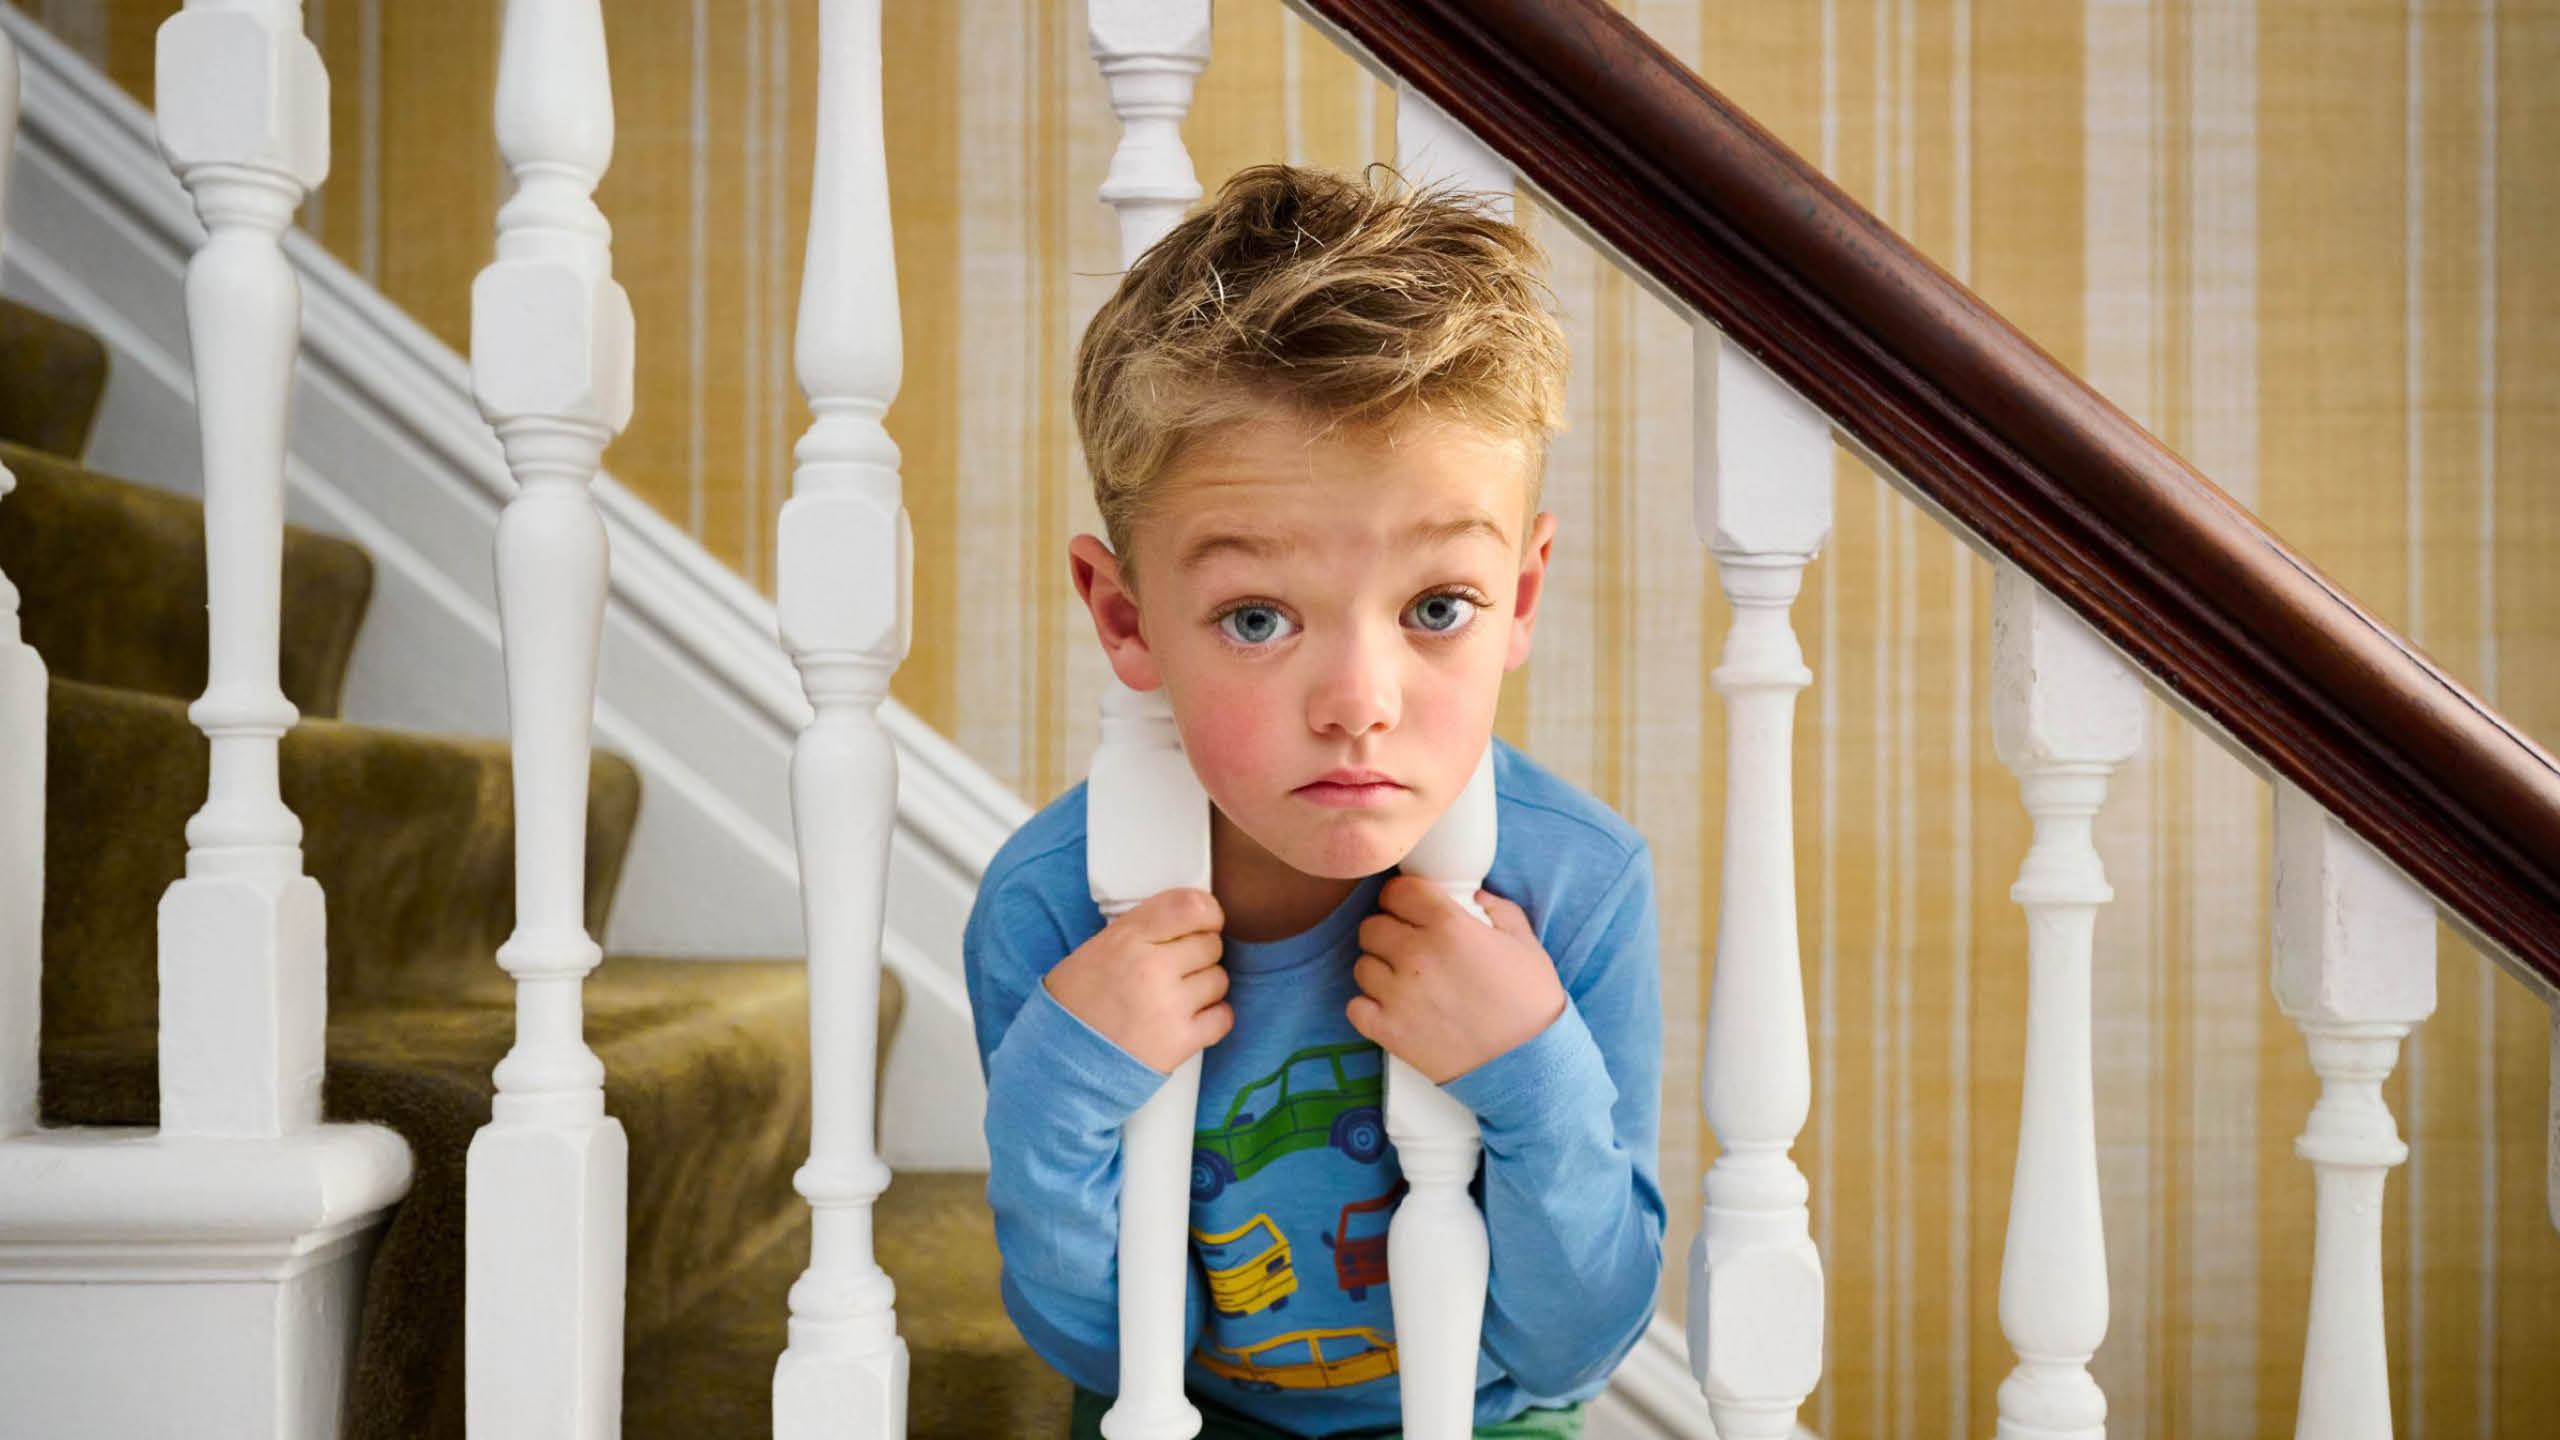 A still from the TVC, a boy with his head stuck in stair bannisters